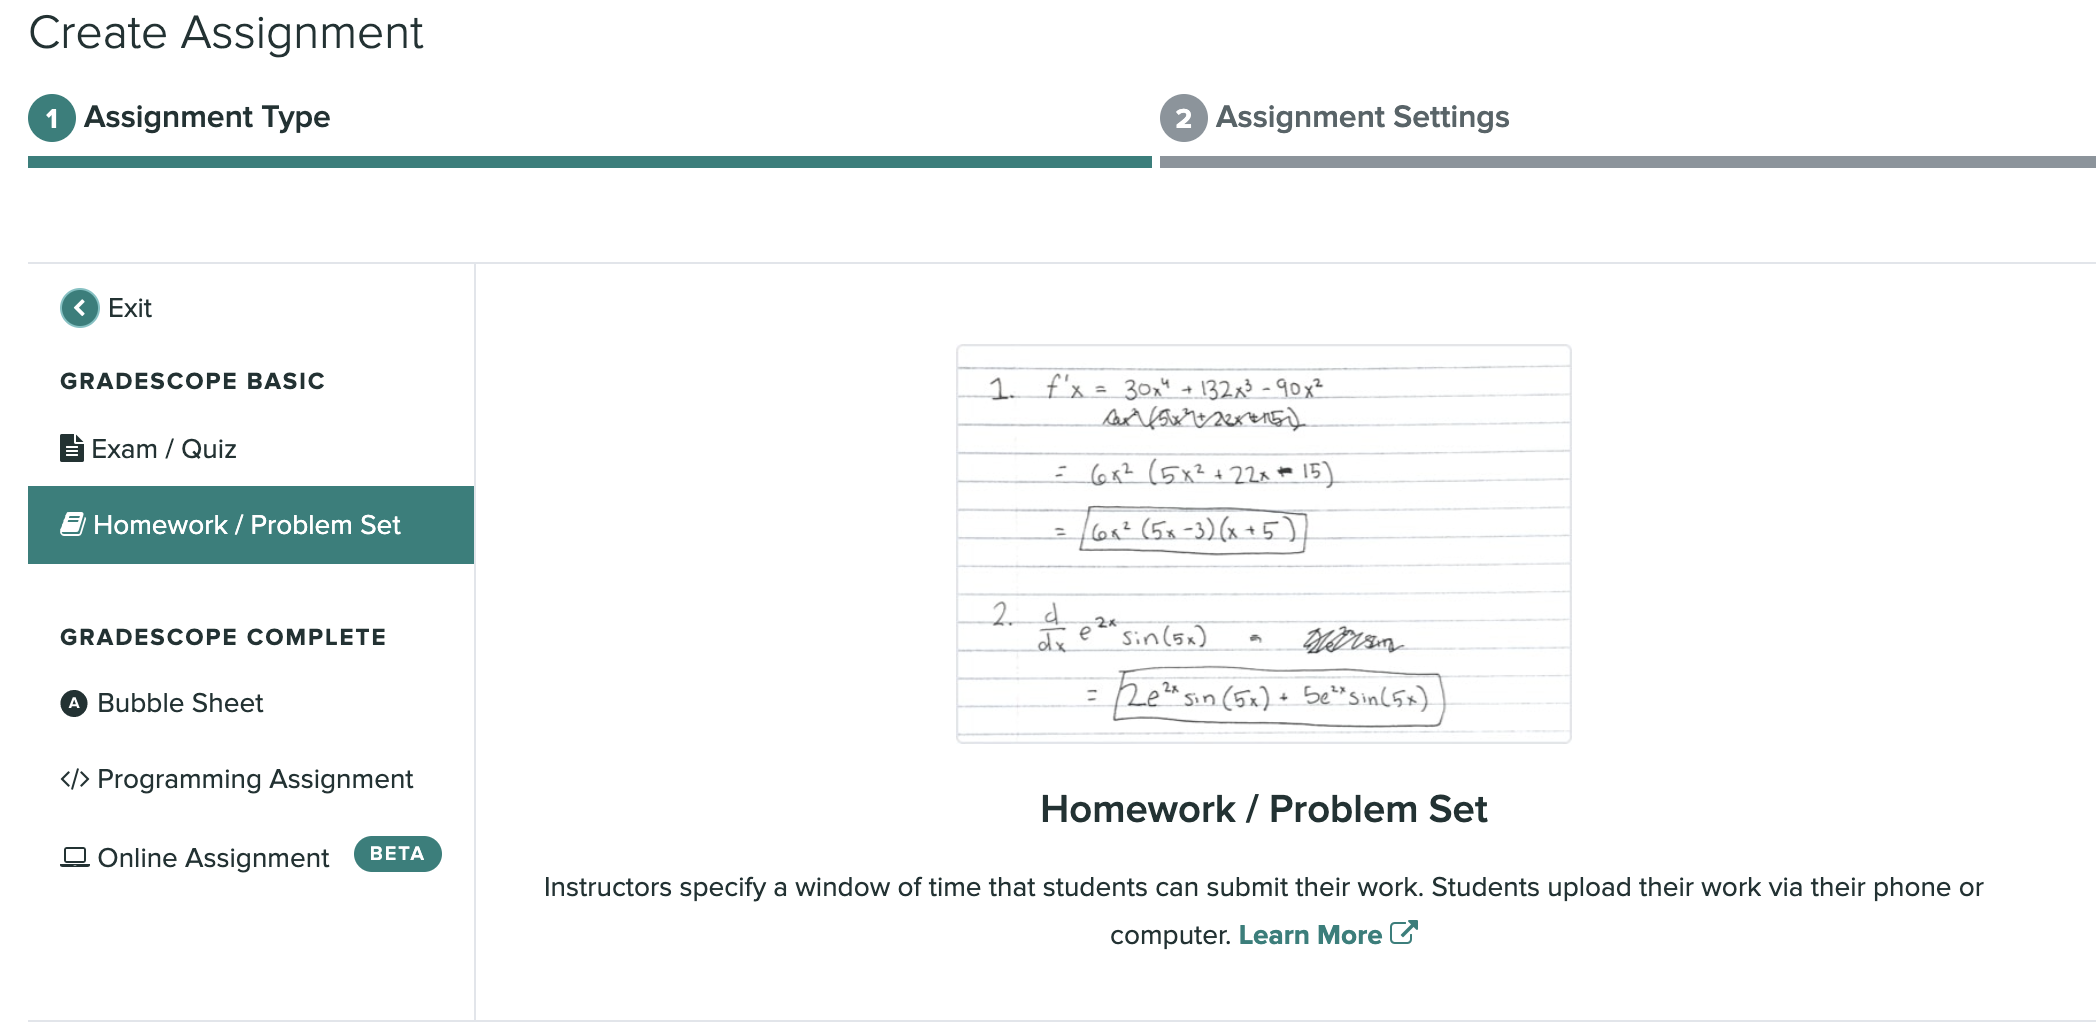 A screen capture of the create assignment page with the homework / problem set option selected.